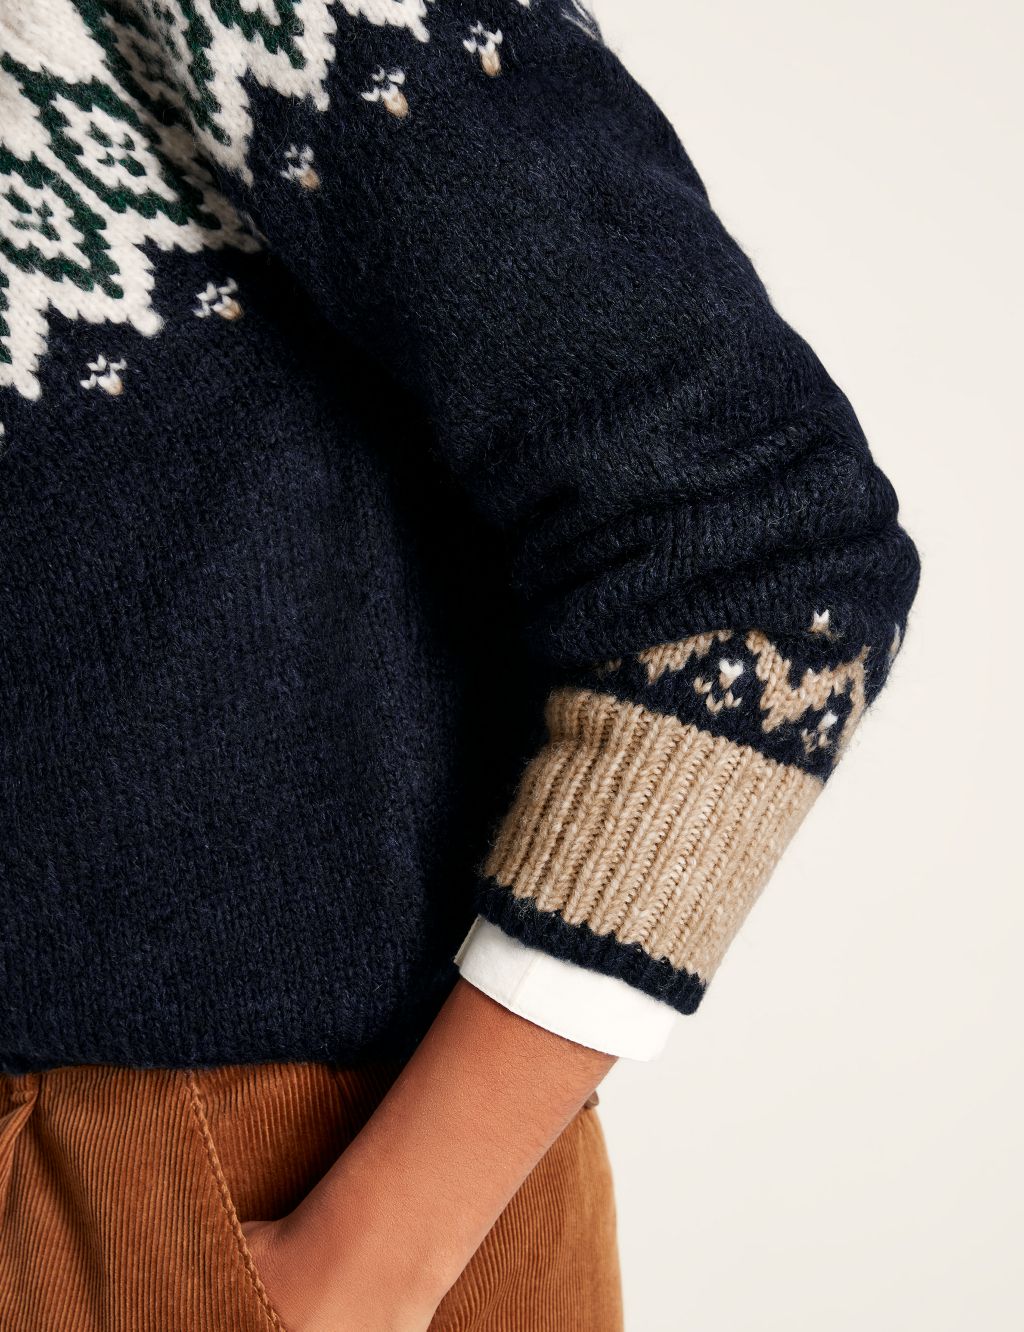 Fair Isle Crew Neck Jumper with Wool image 6